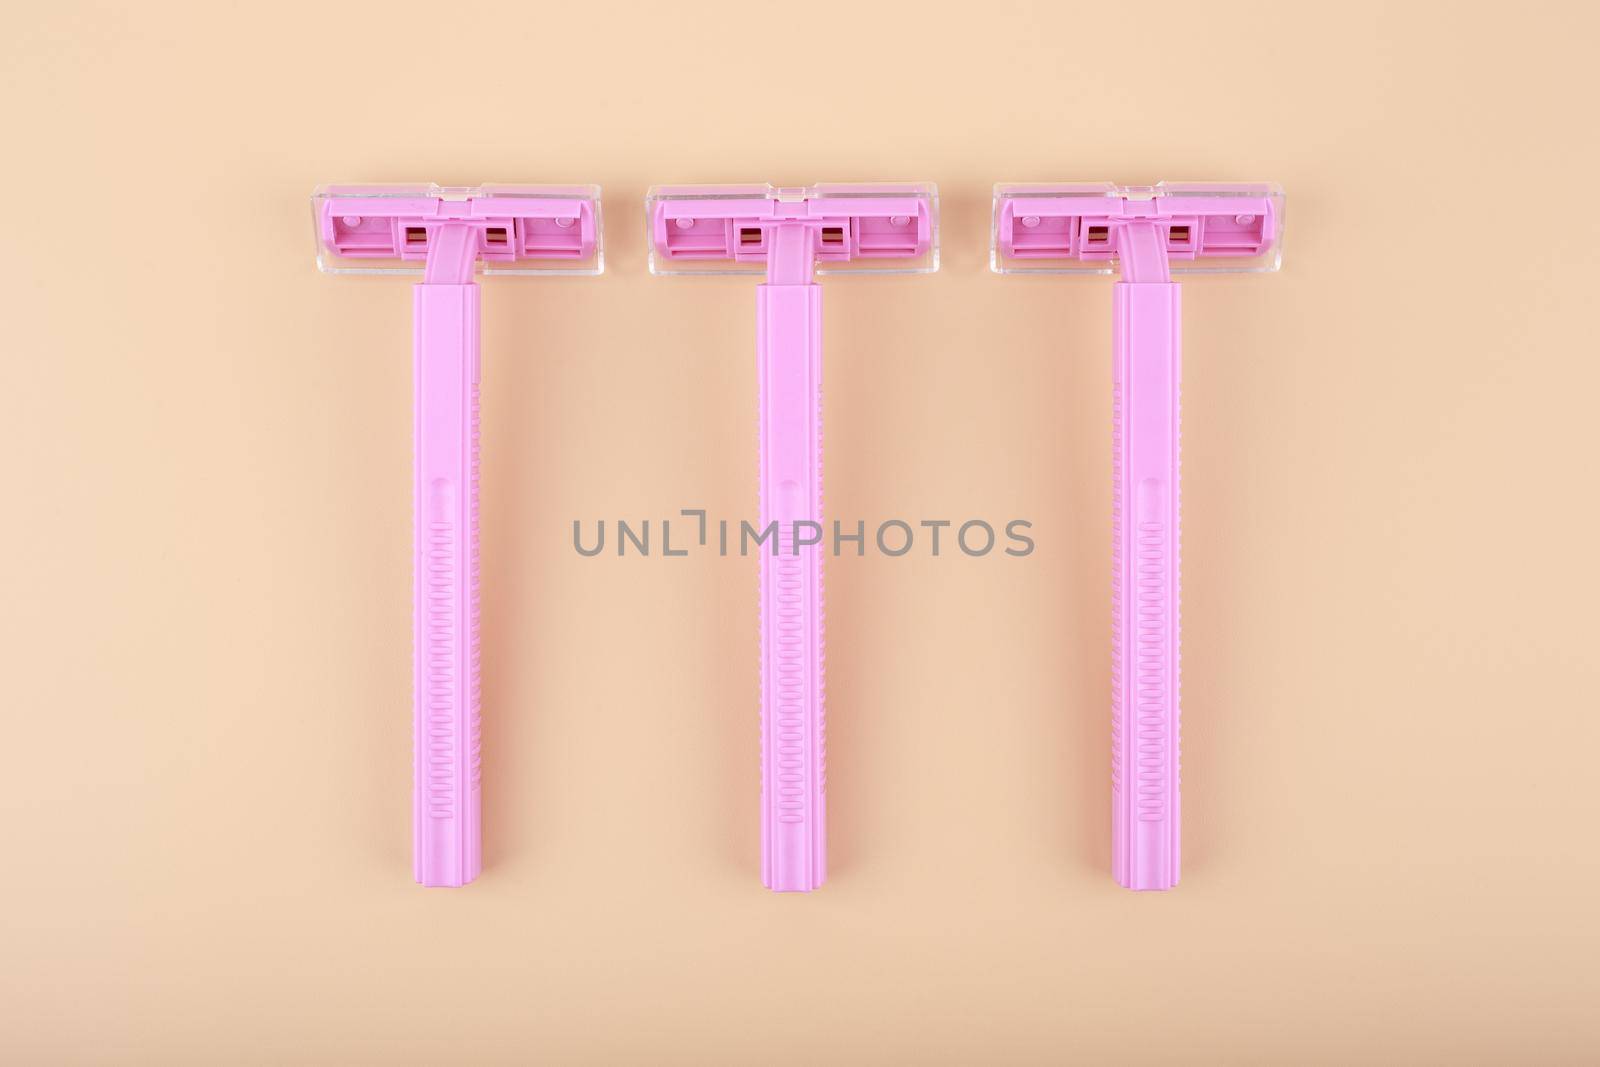 Top view of three pink razors in a row on light beige background. Concept of smooth skin, shaving and epilation